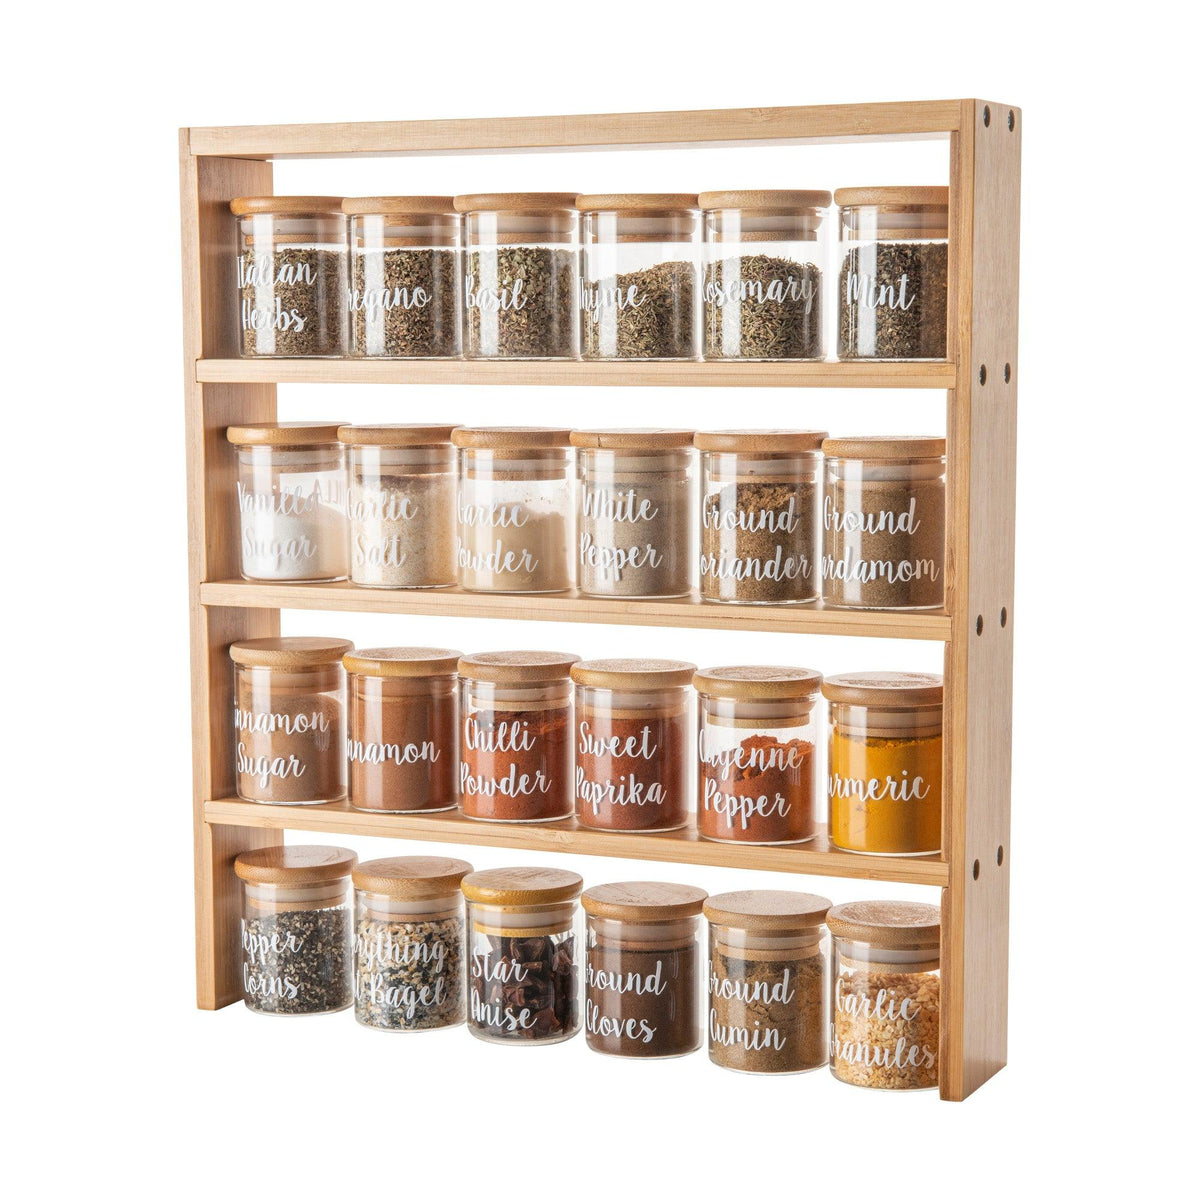 https://www.littlelabelco.com/cdn/shop/files/standing-4-tier-rack-with-24-75ml-herb-and-spice-jars-pack-little-label-co_db229c5a-3b17-478c-ba35-47c5f623a723_1200x1200.jpg?v=1689905854